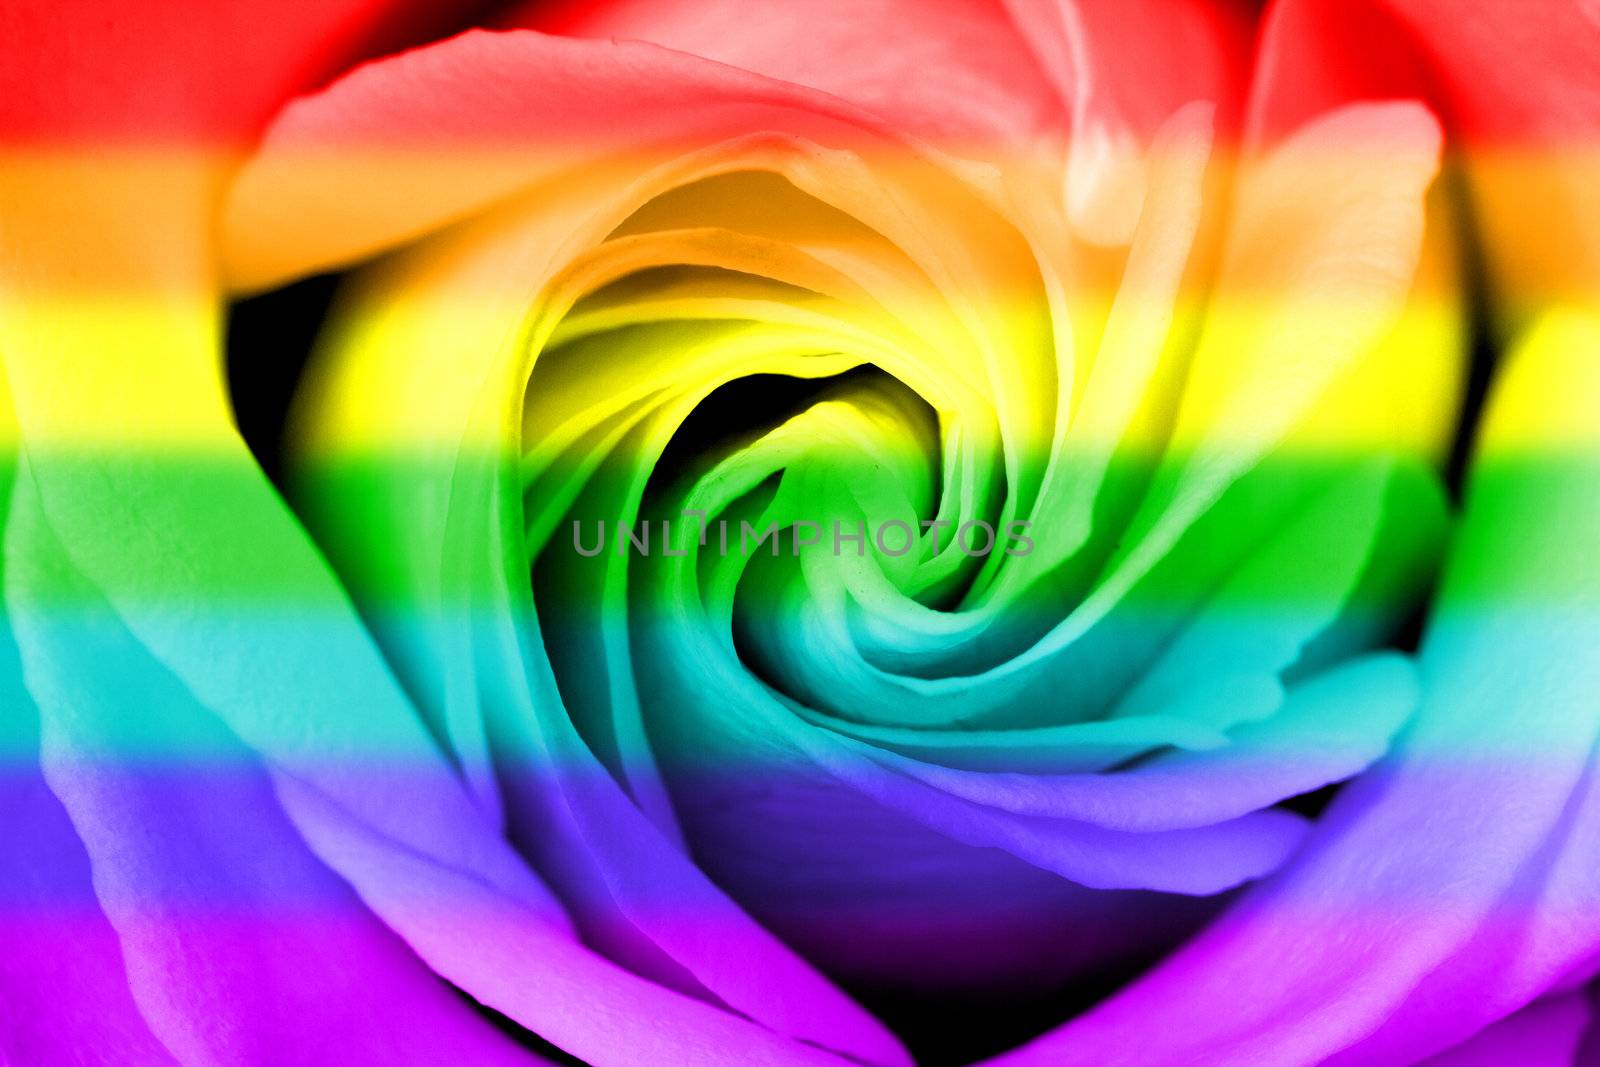 Rose in the colors of the rainbow flag